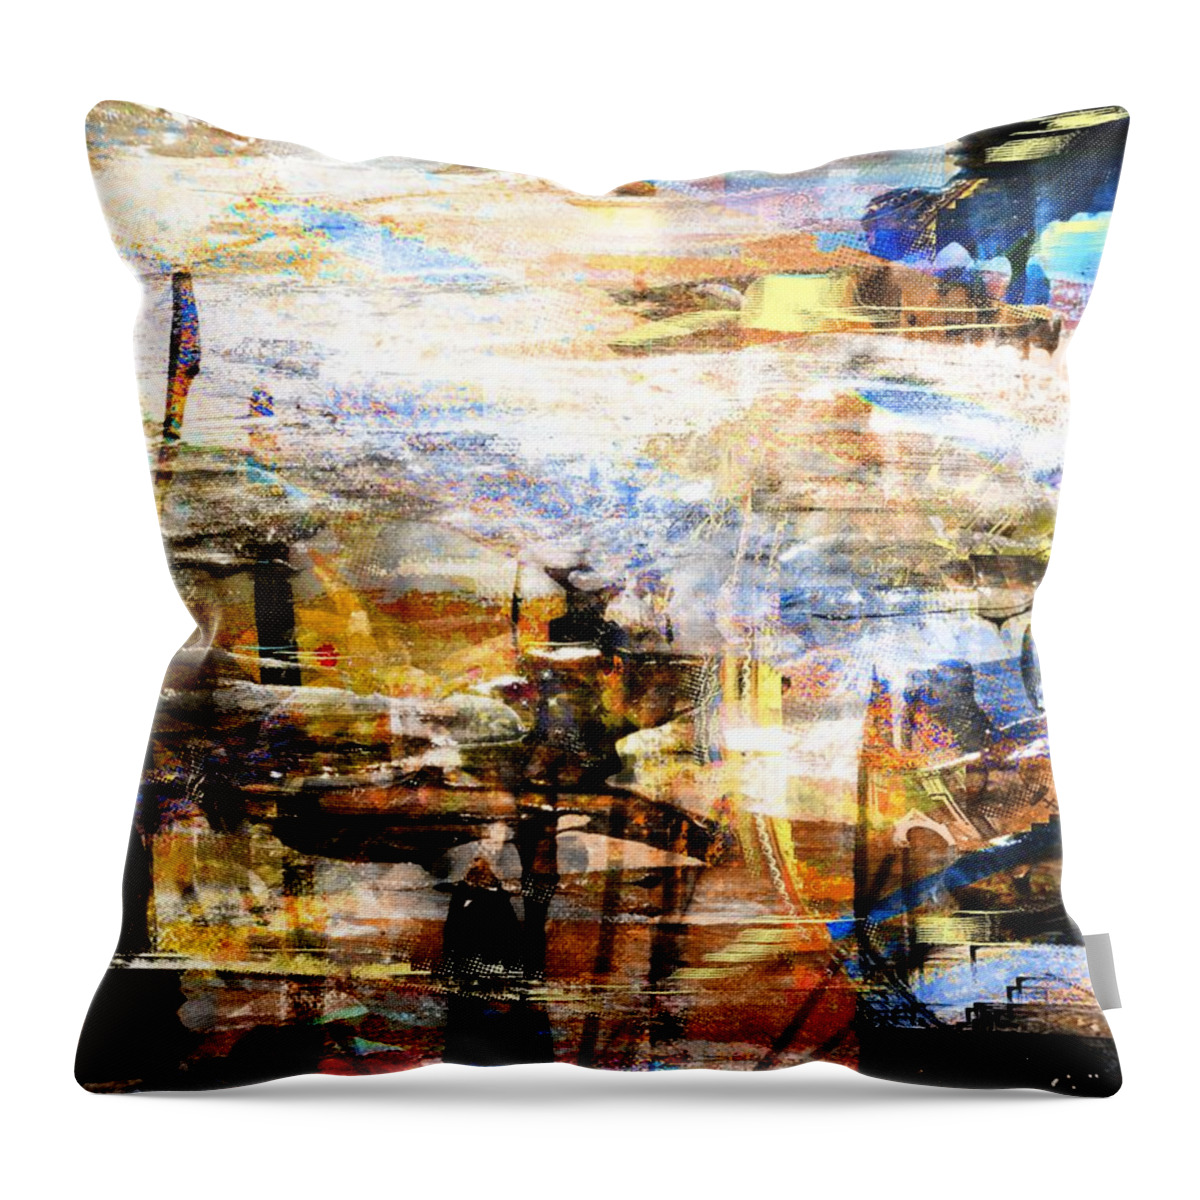 Abstract Throw Pillow featuring the digital art Dancing In The Light by Art Di